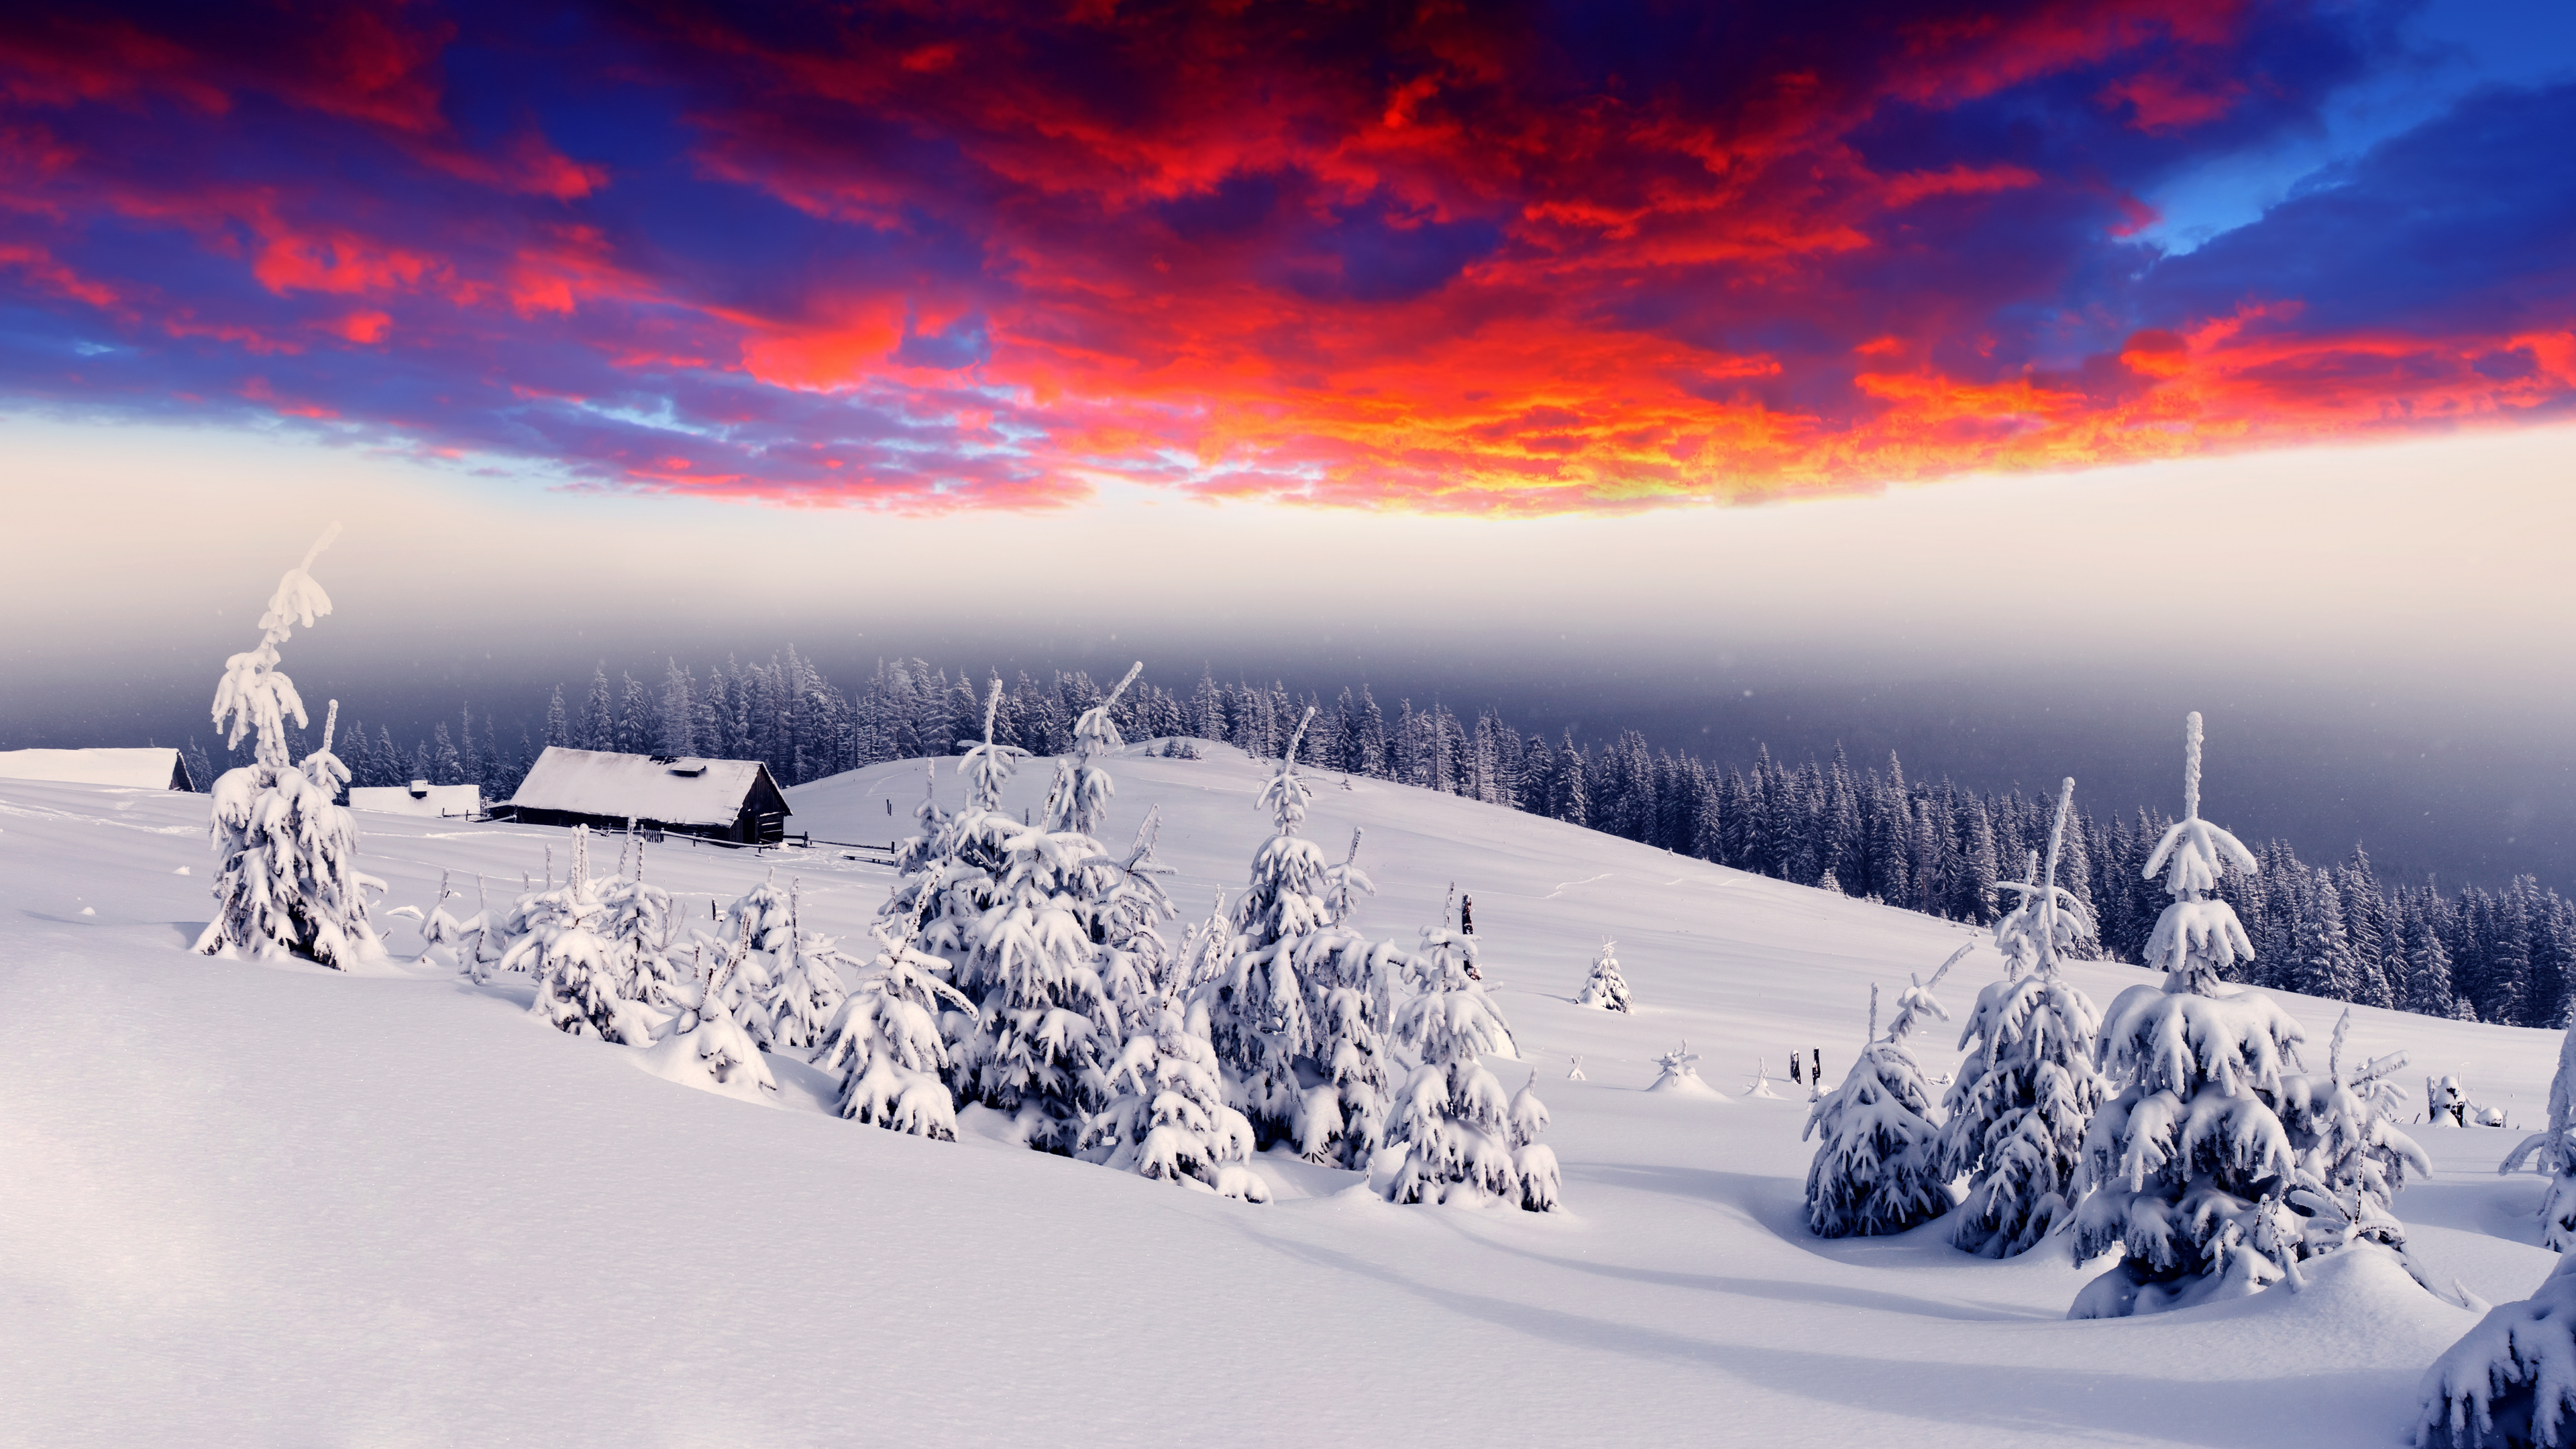 Snow Covered Field During Sunset. Wallpaper in 3840x2160 Resolution